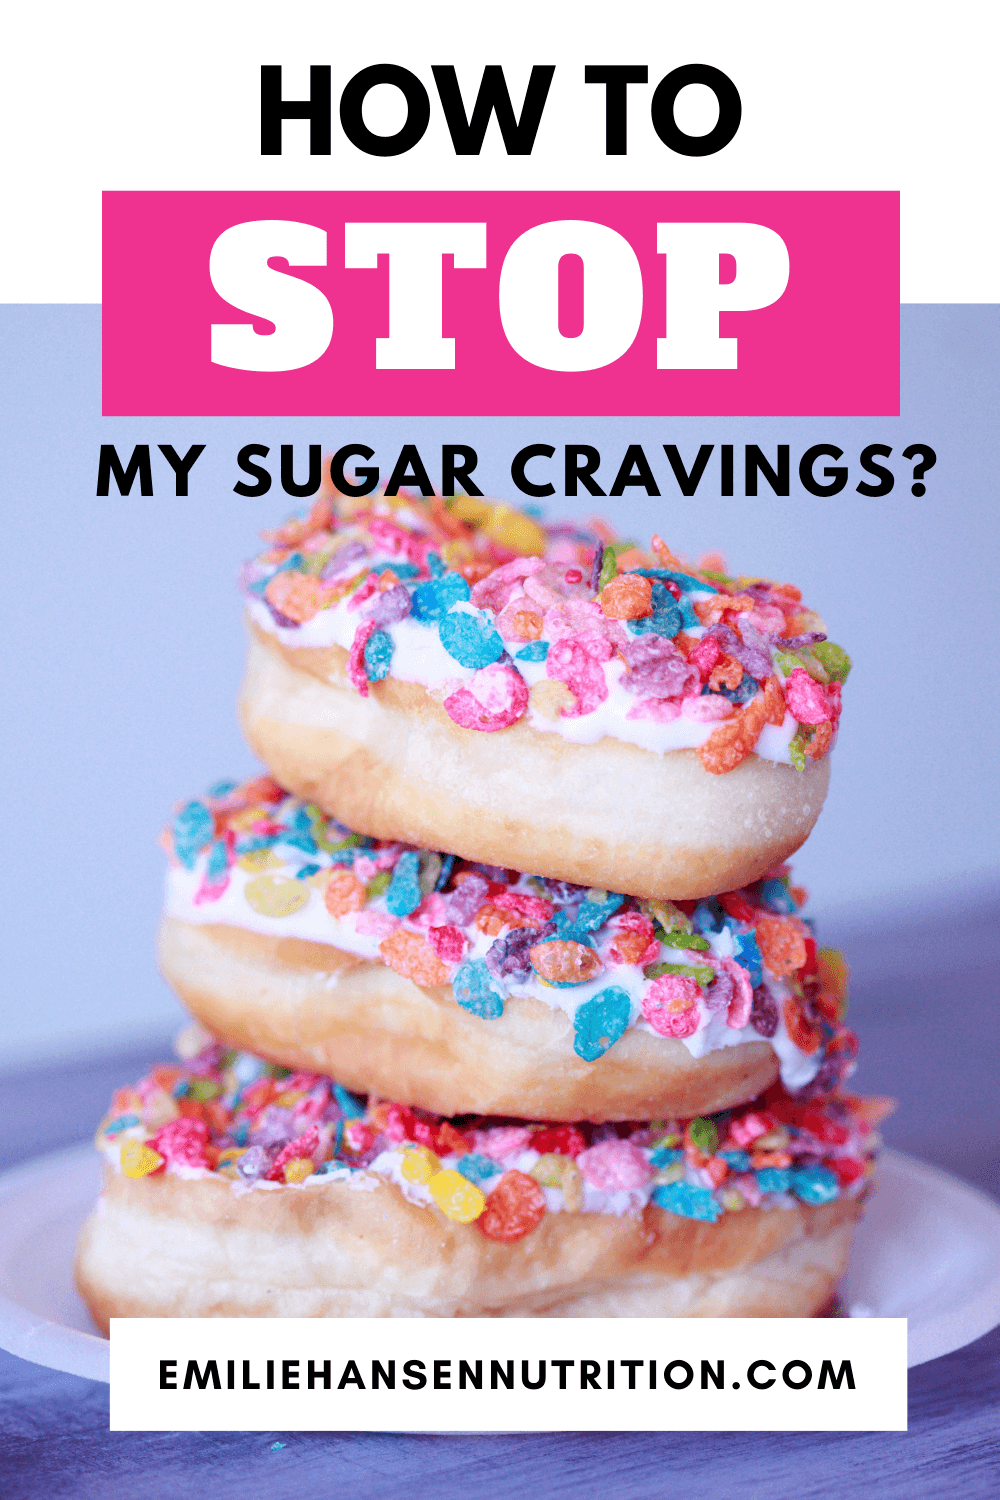 Break Your Sugar Addiction: How to Curb the Cravings ...